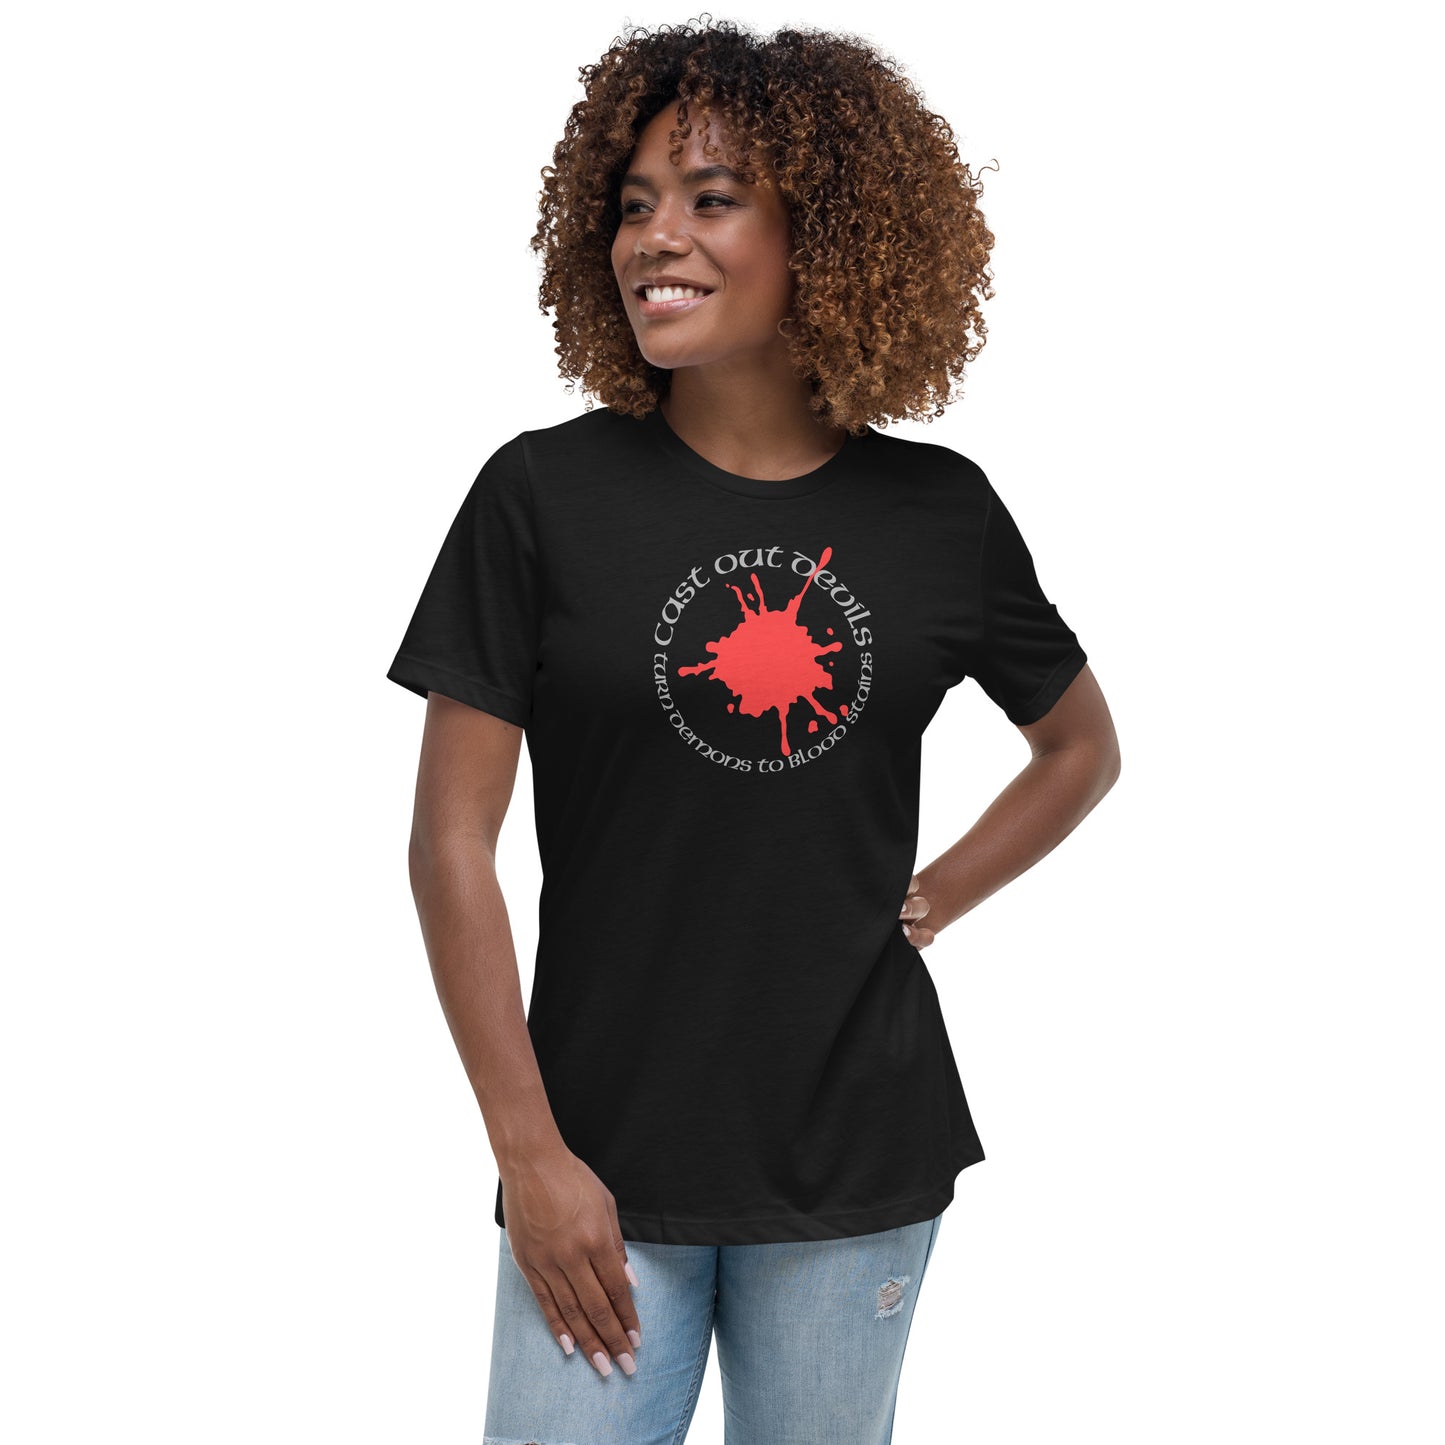 Cast Out Devils Turn Demons To Blood Stains Women's Relaxed T-Shirt